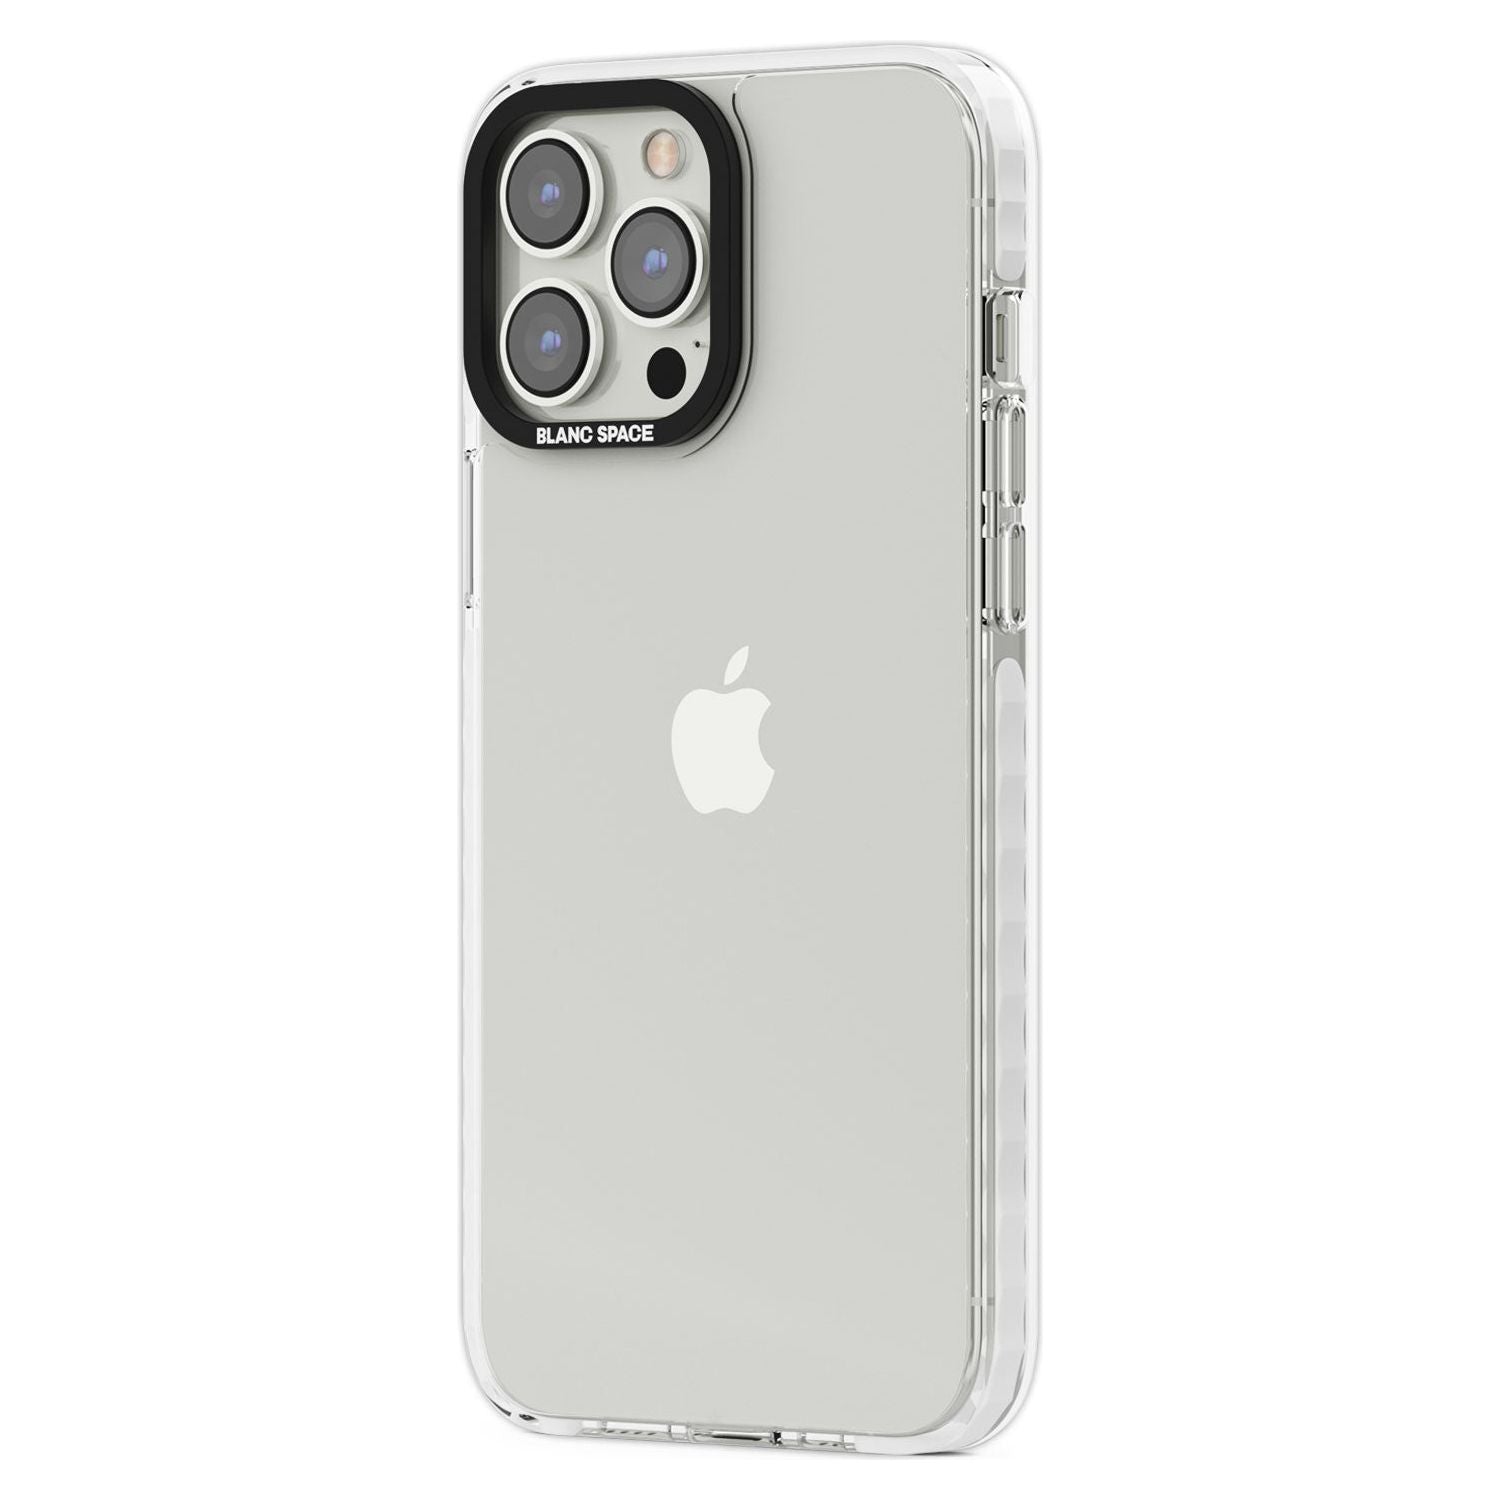 Clear Impact Phone Case iPhone 15 Pro Max / Impact Case,iPhone 15 Plus / Impact Case,iPhone 15 Pro / Impact Case,iPhone 15 / Impact Case,iPhone 14 Pro Max / Impact Case,iPhone 14 Plus / Impact Case,iPhone 14 Pro / Impact Case,iPhone 14 / Impact Case,iPhone 13 Pro Max / Impact Case,iPhone 13 Pro / Impact Case,iPhone 13 / Impact Case,iPhone 13 Mini / Impact Case,iPhone 12 Pro Max / Impact Case,iPhone 12 Pro / Impact Case,iPhone 12 / Impact Case,iPhone 12 Mini / Impact Case,iPhone 11 / Impact Case,iPhone 11 Pr